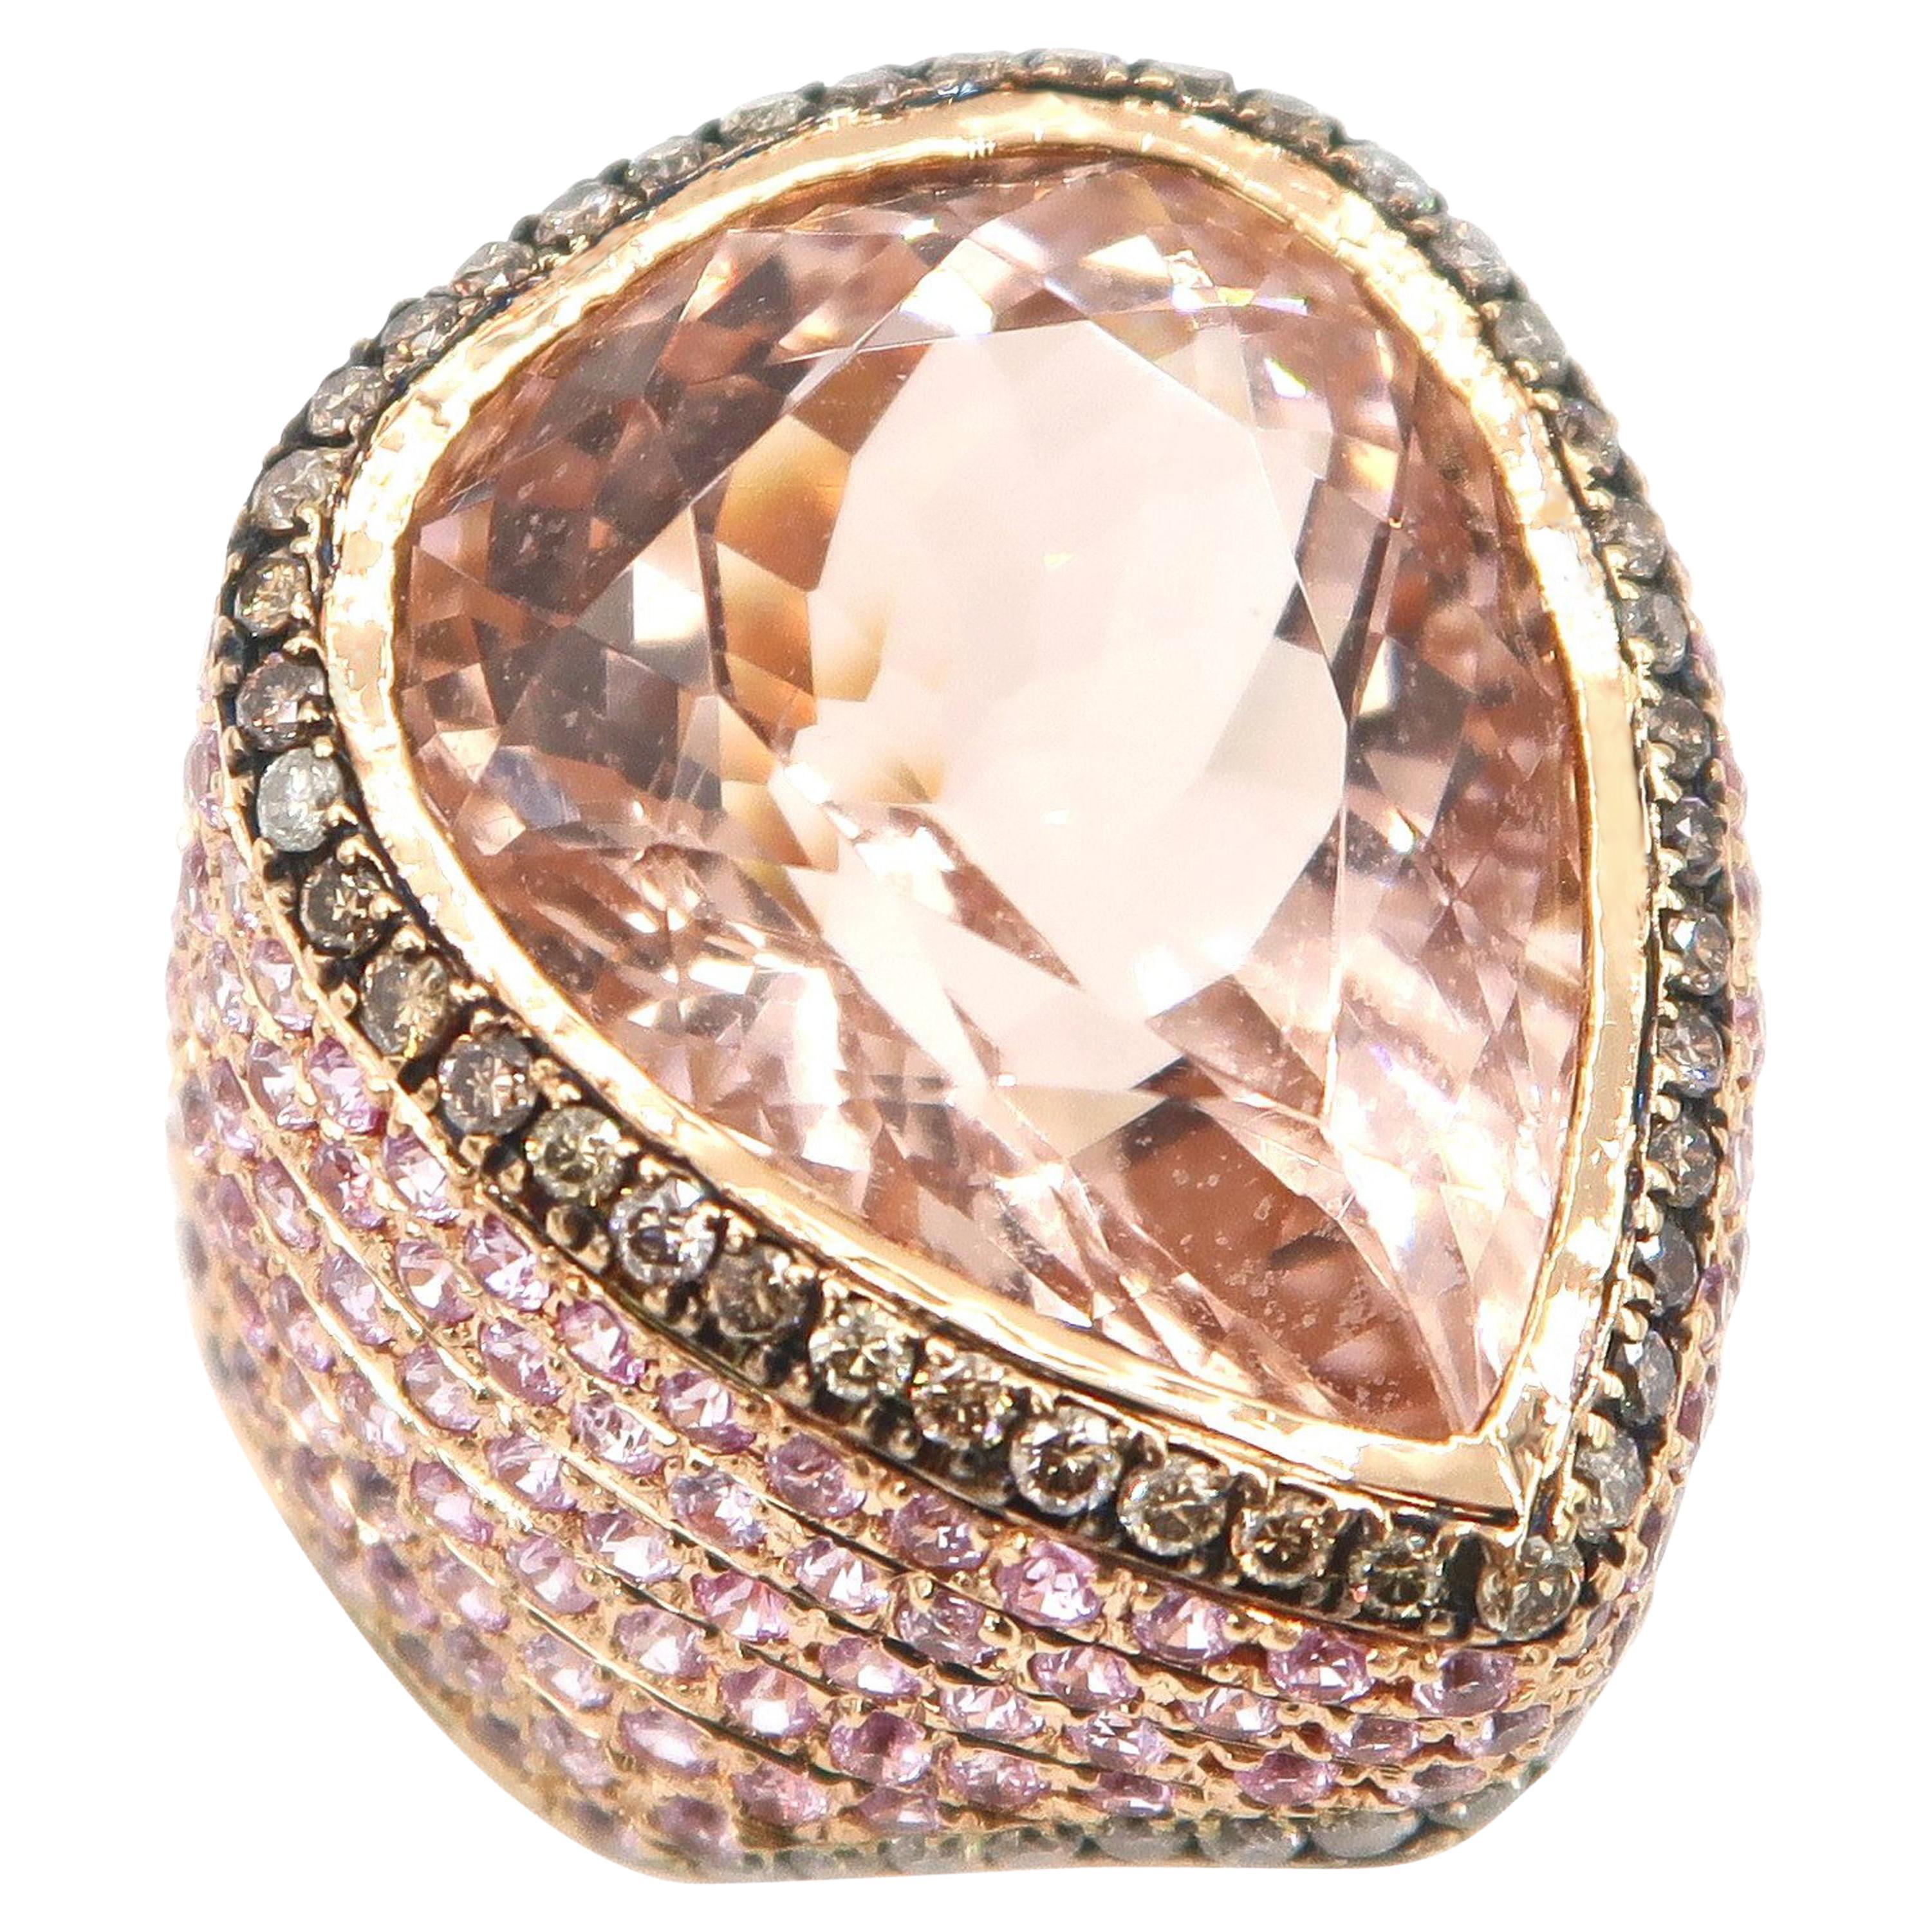 BOON 17.12 Carat Pear Shape Morganite Champagne Diamond Pink Sapphire Gold Ring For Sale